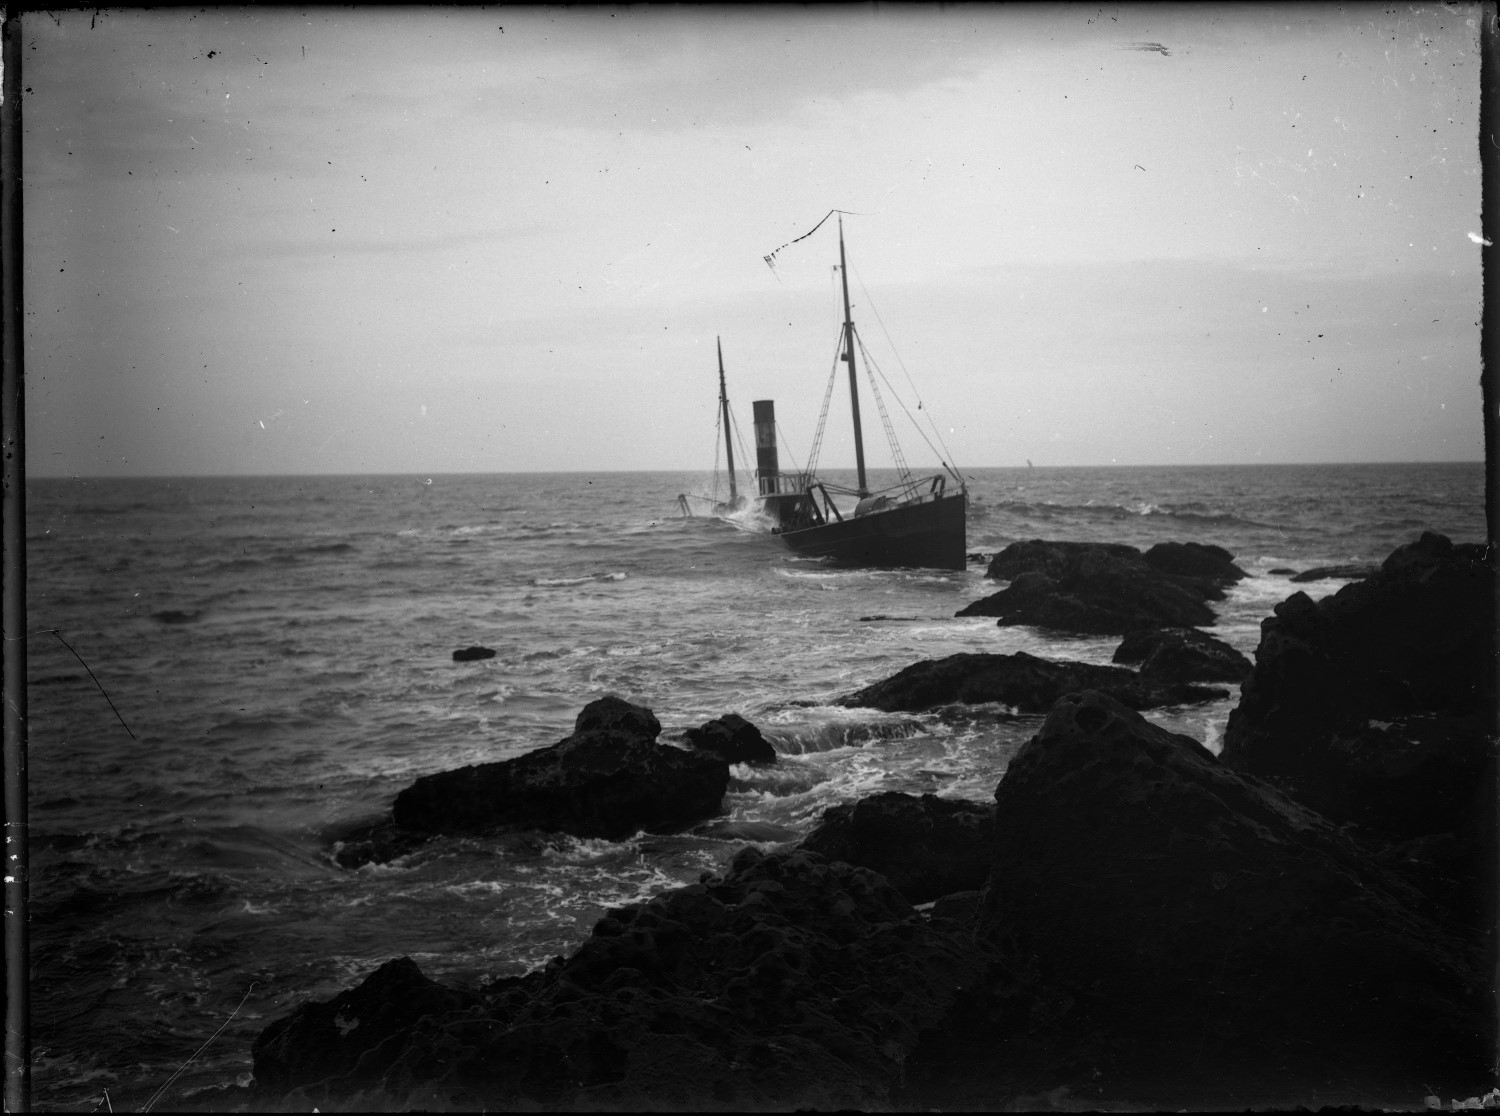 Shipwreck off the coast of Cap Spartel, boat sinking 